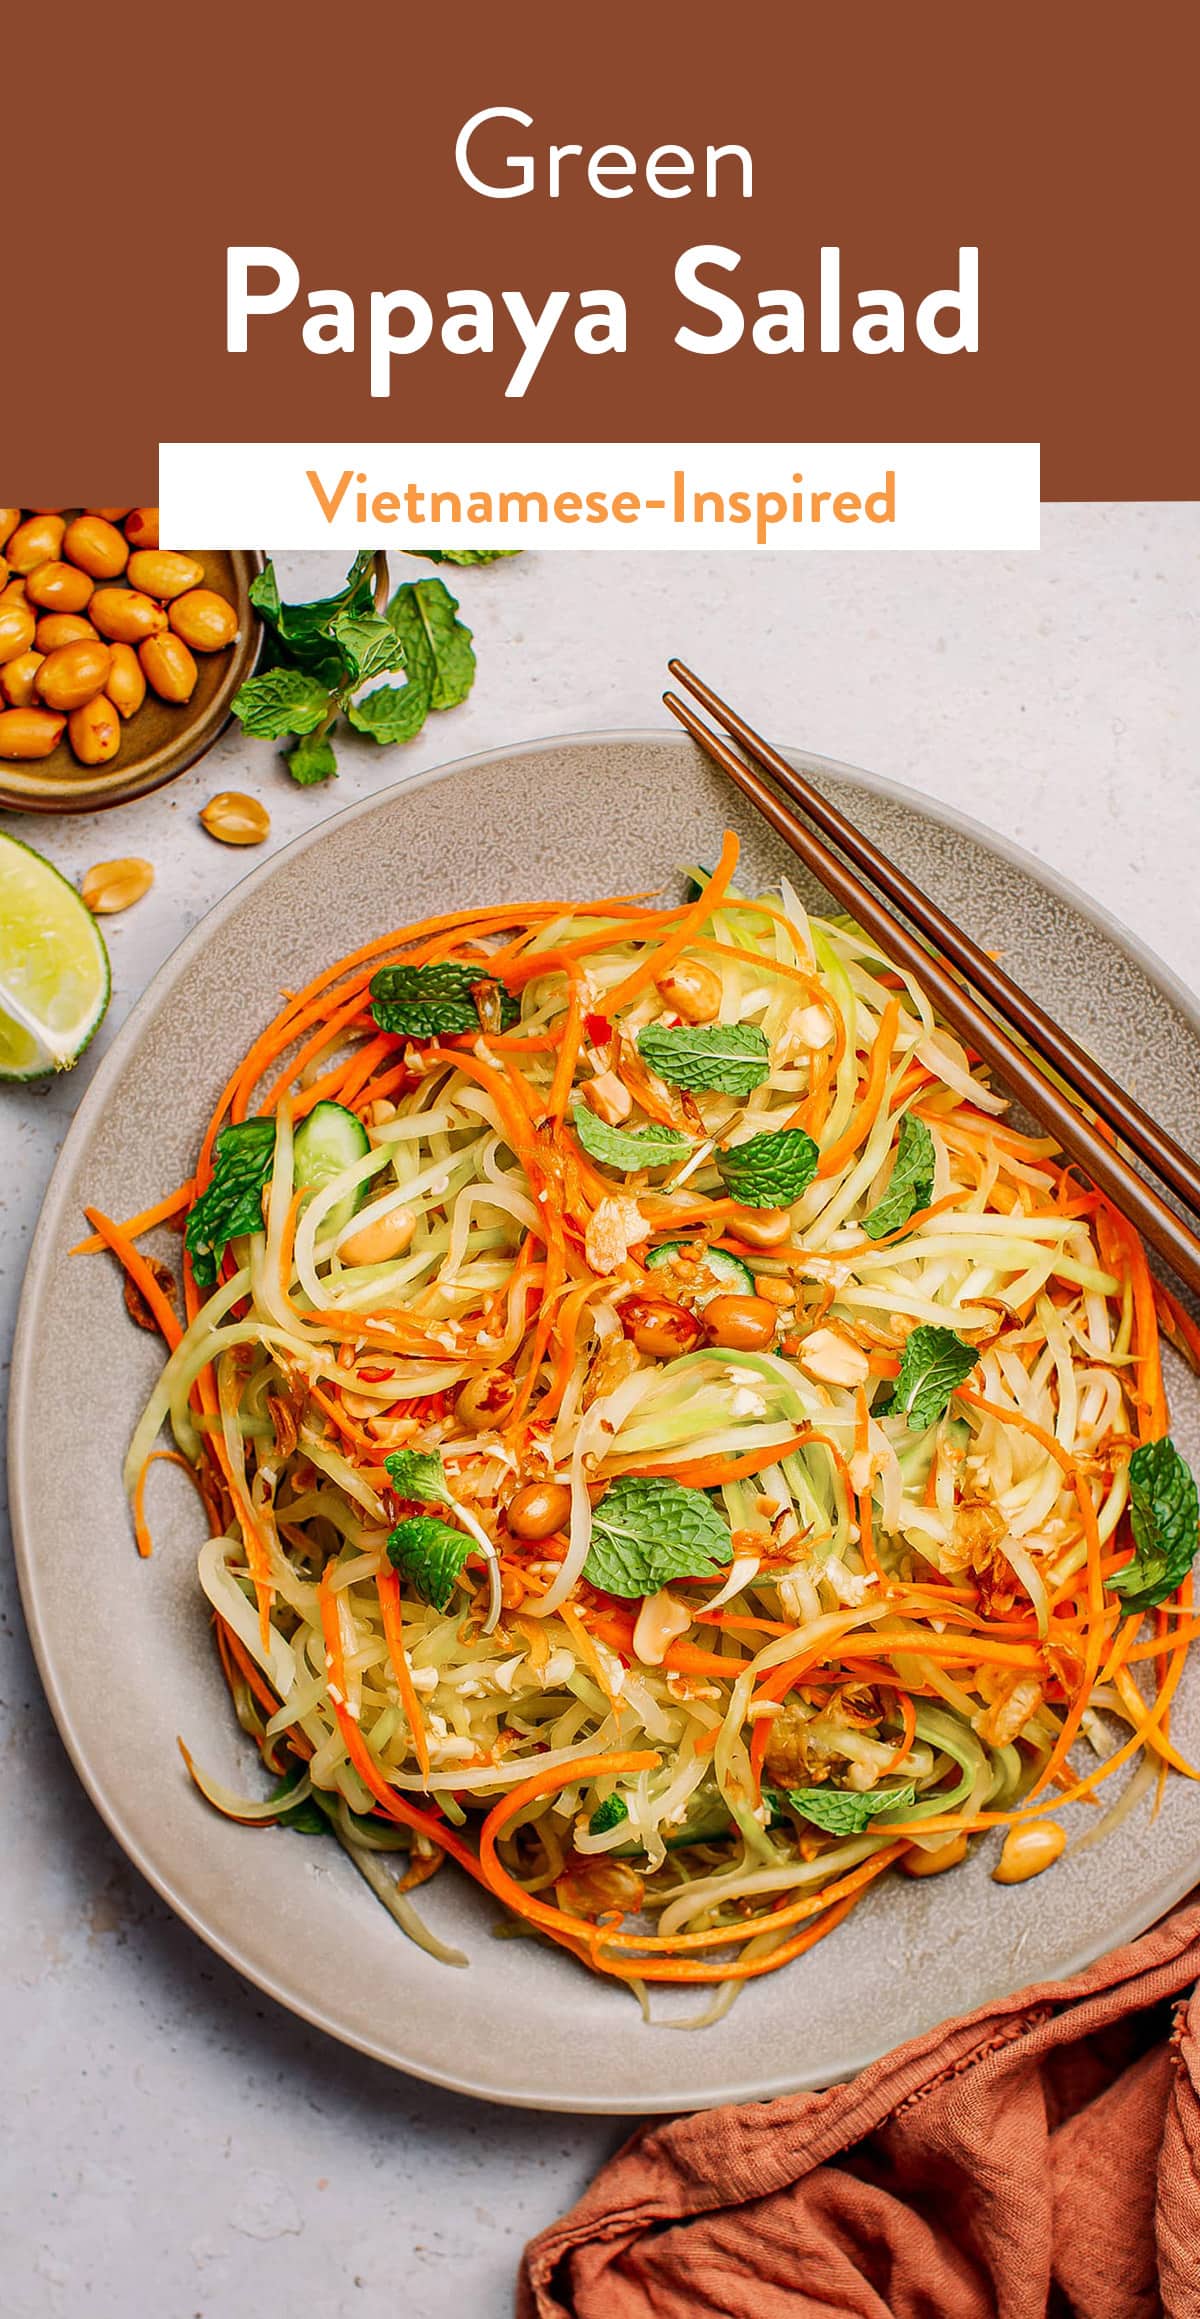 This super fresh green papaya salad is packed with raw crunchy veggies, roasted peanuts, fried shallots, and a citrusy lime dressing! It's easy to prepare, refreshing, and plant-based!